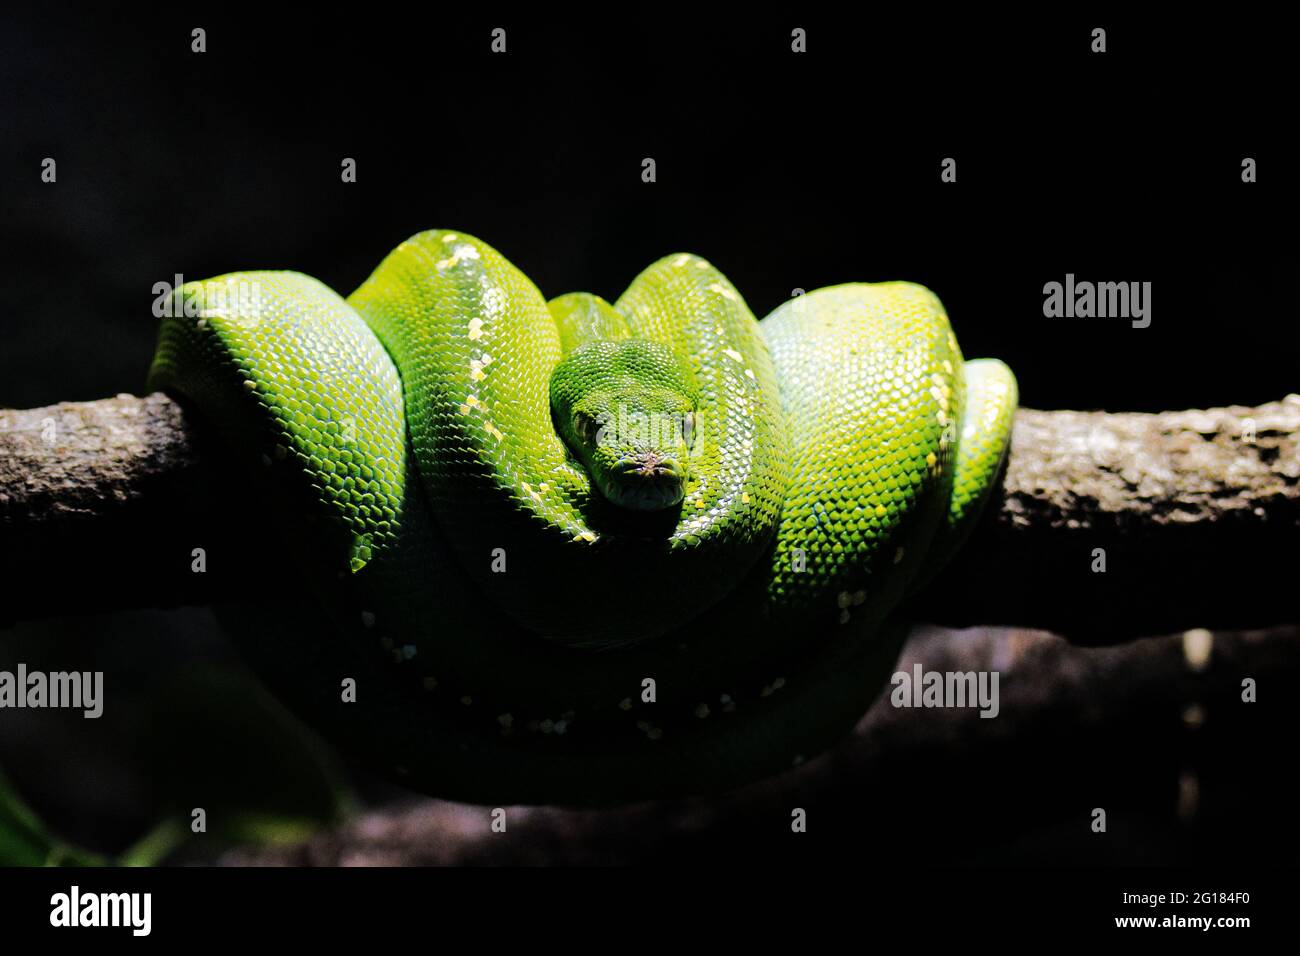 A green mamba (snake) lies rolled on a branch. The background is dark. Stock Photo